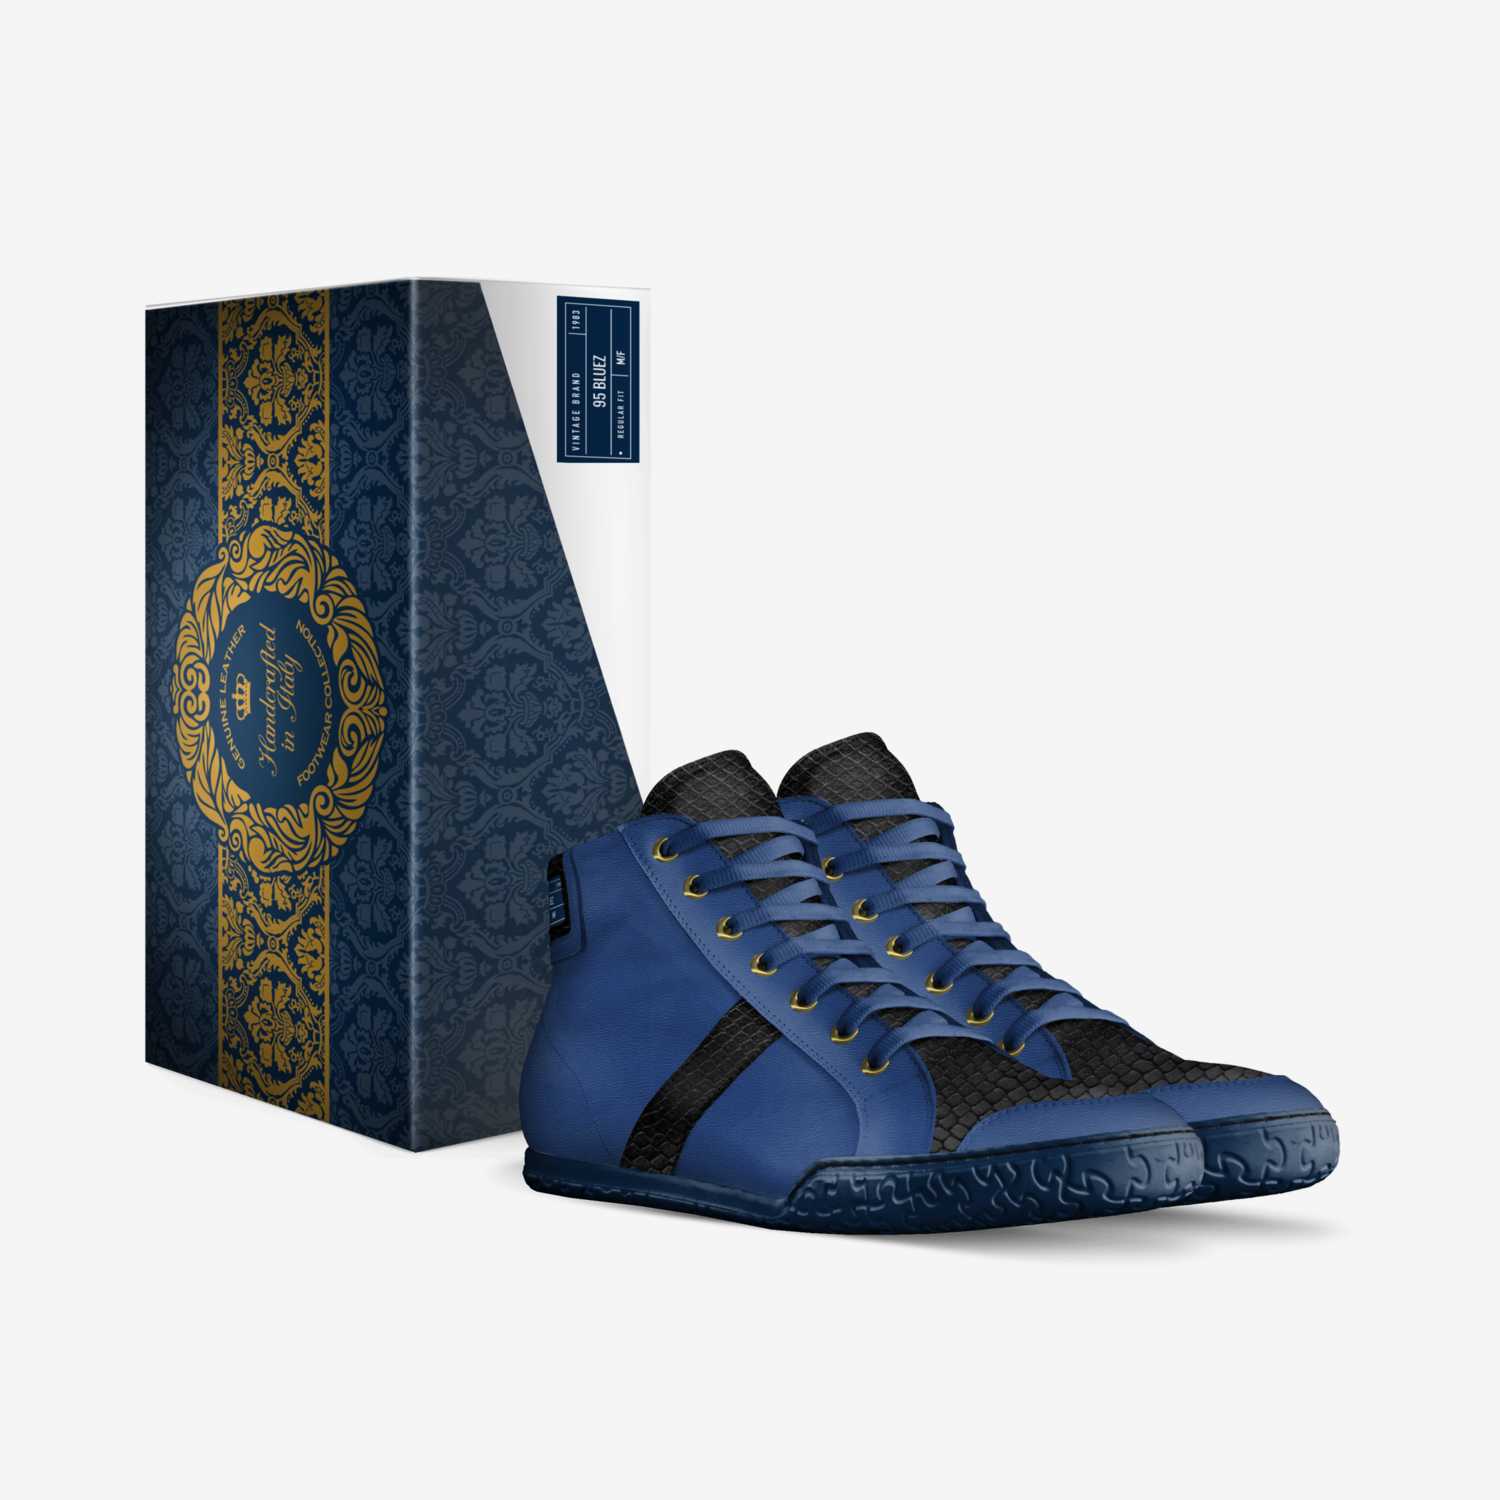 95 BLUEZ custom made in Italy shoes by Edward Baxter | Box view